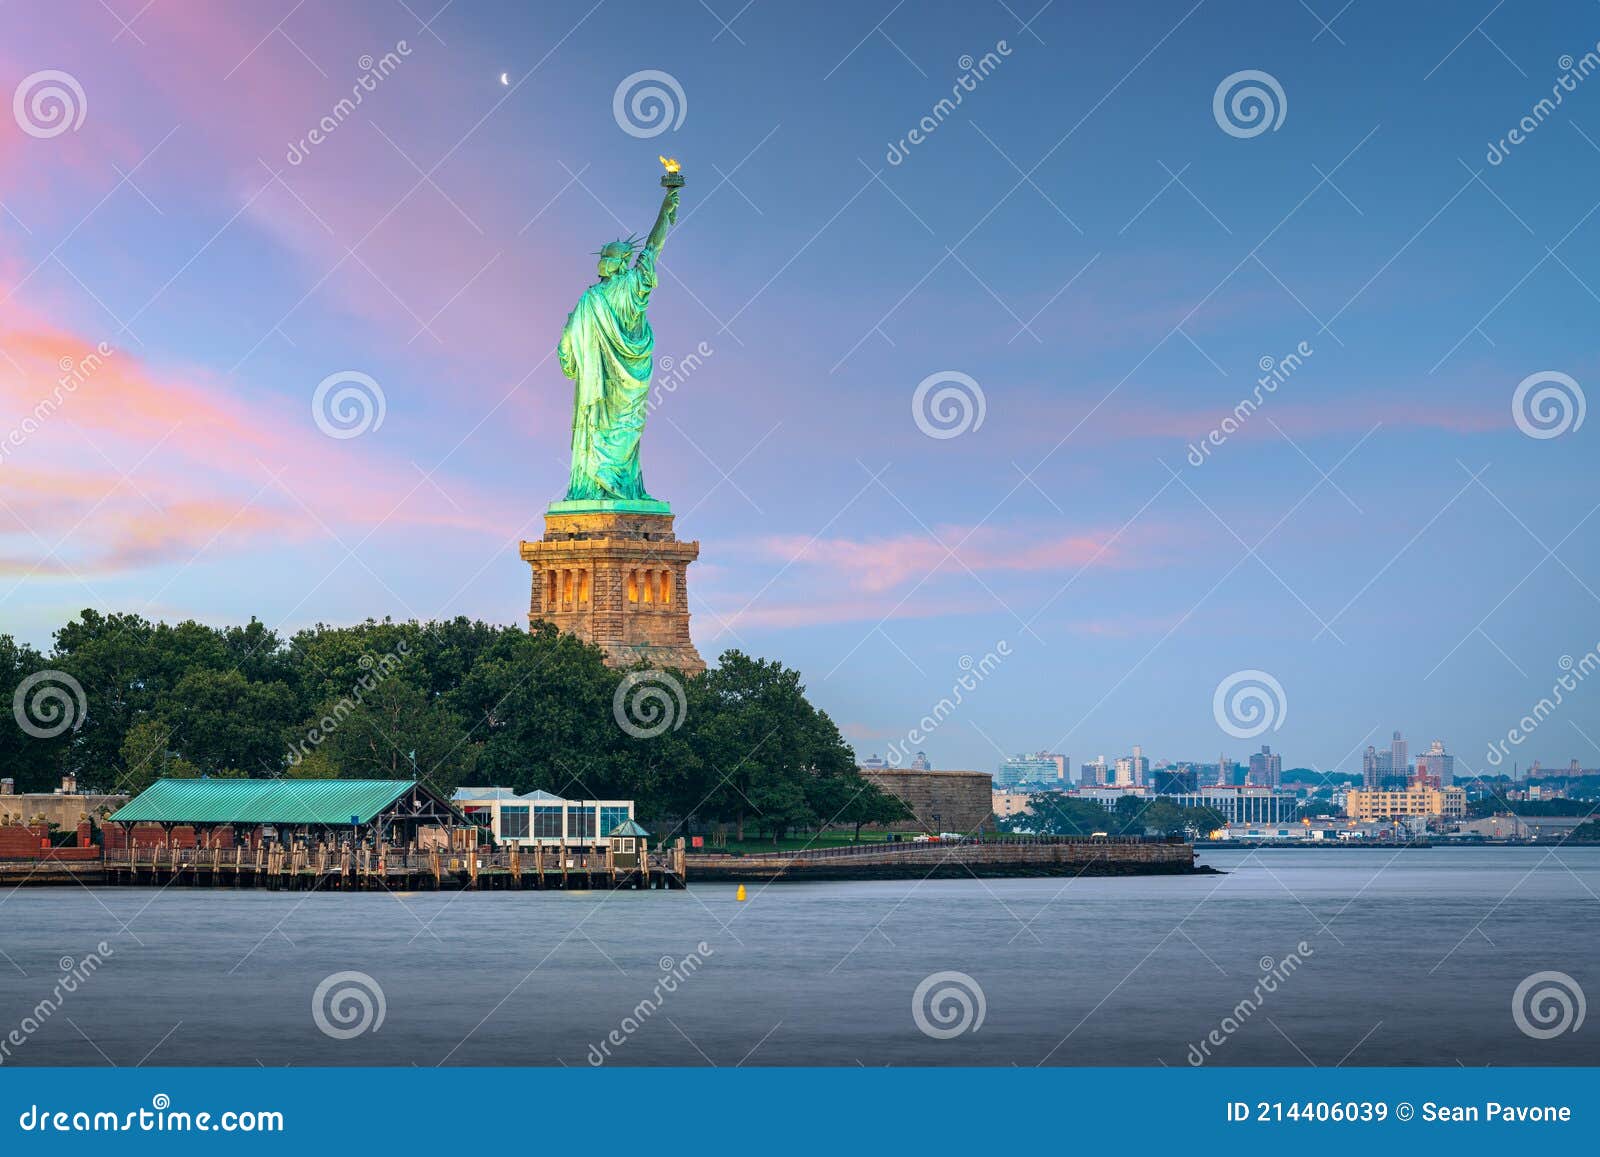 statue of liberty in new york harbor